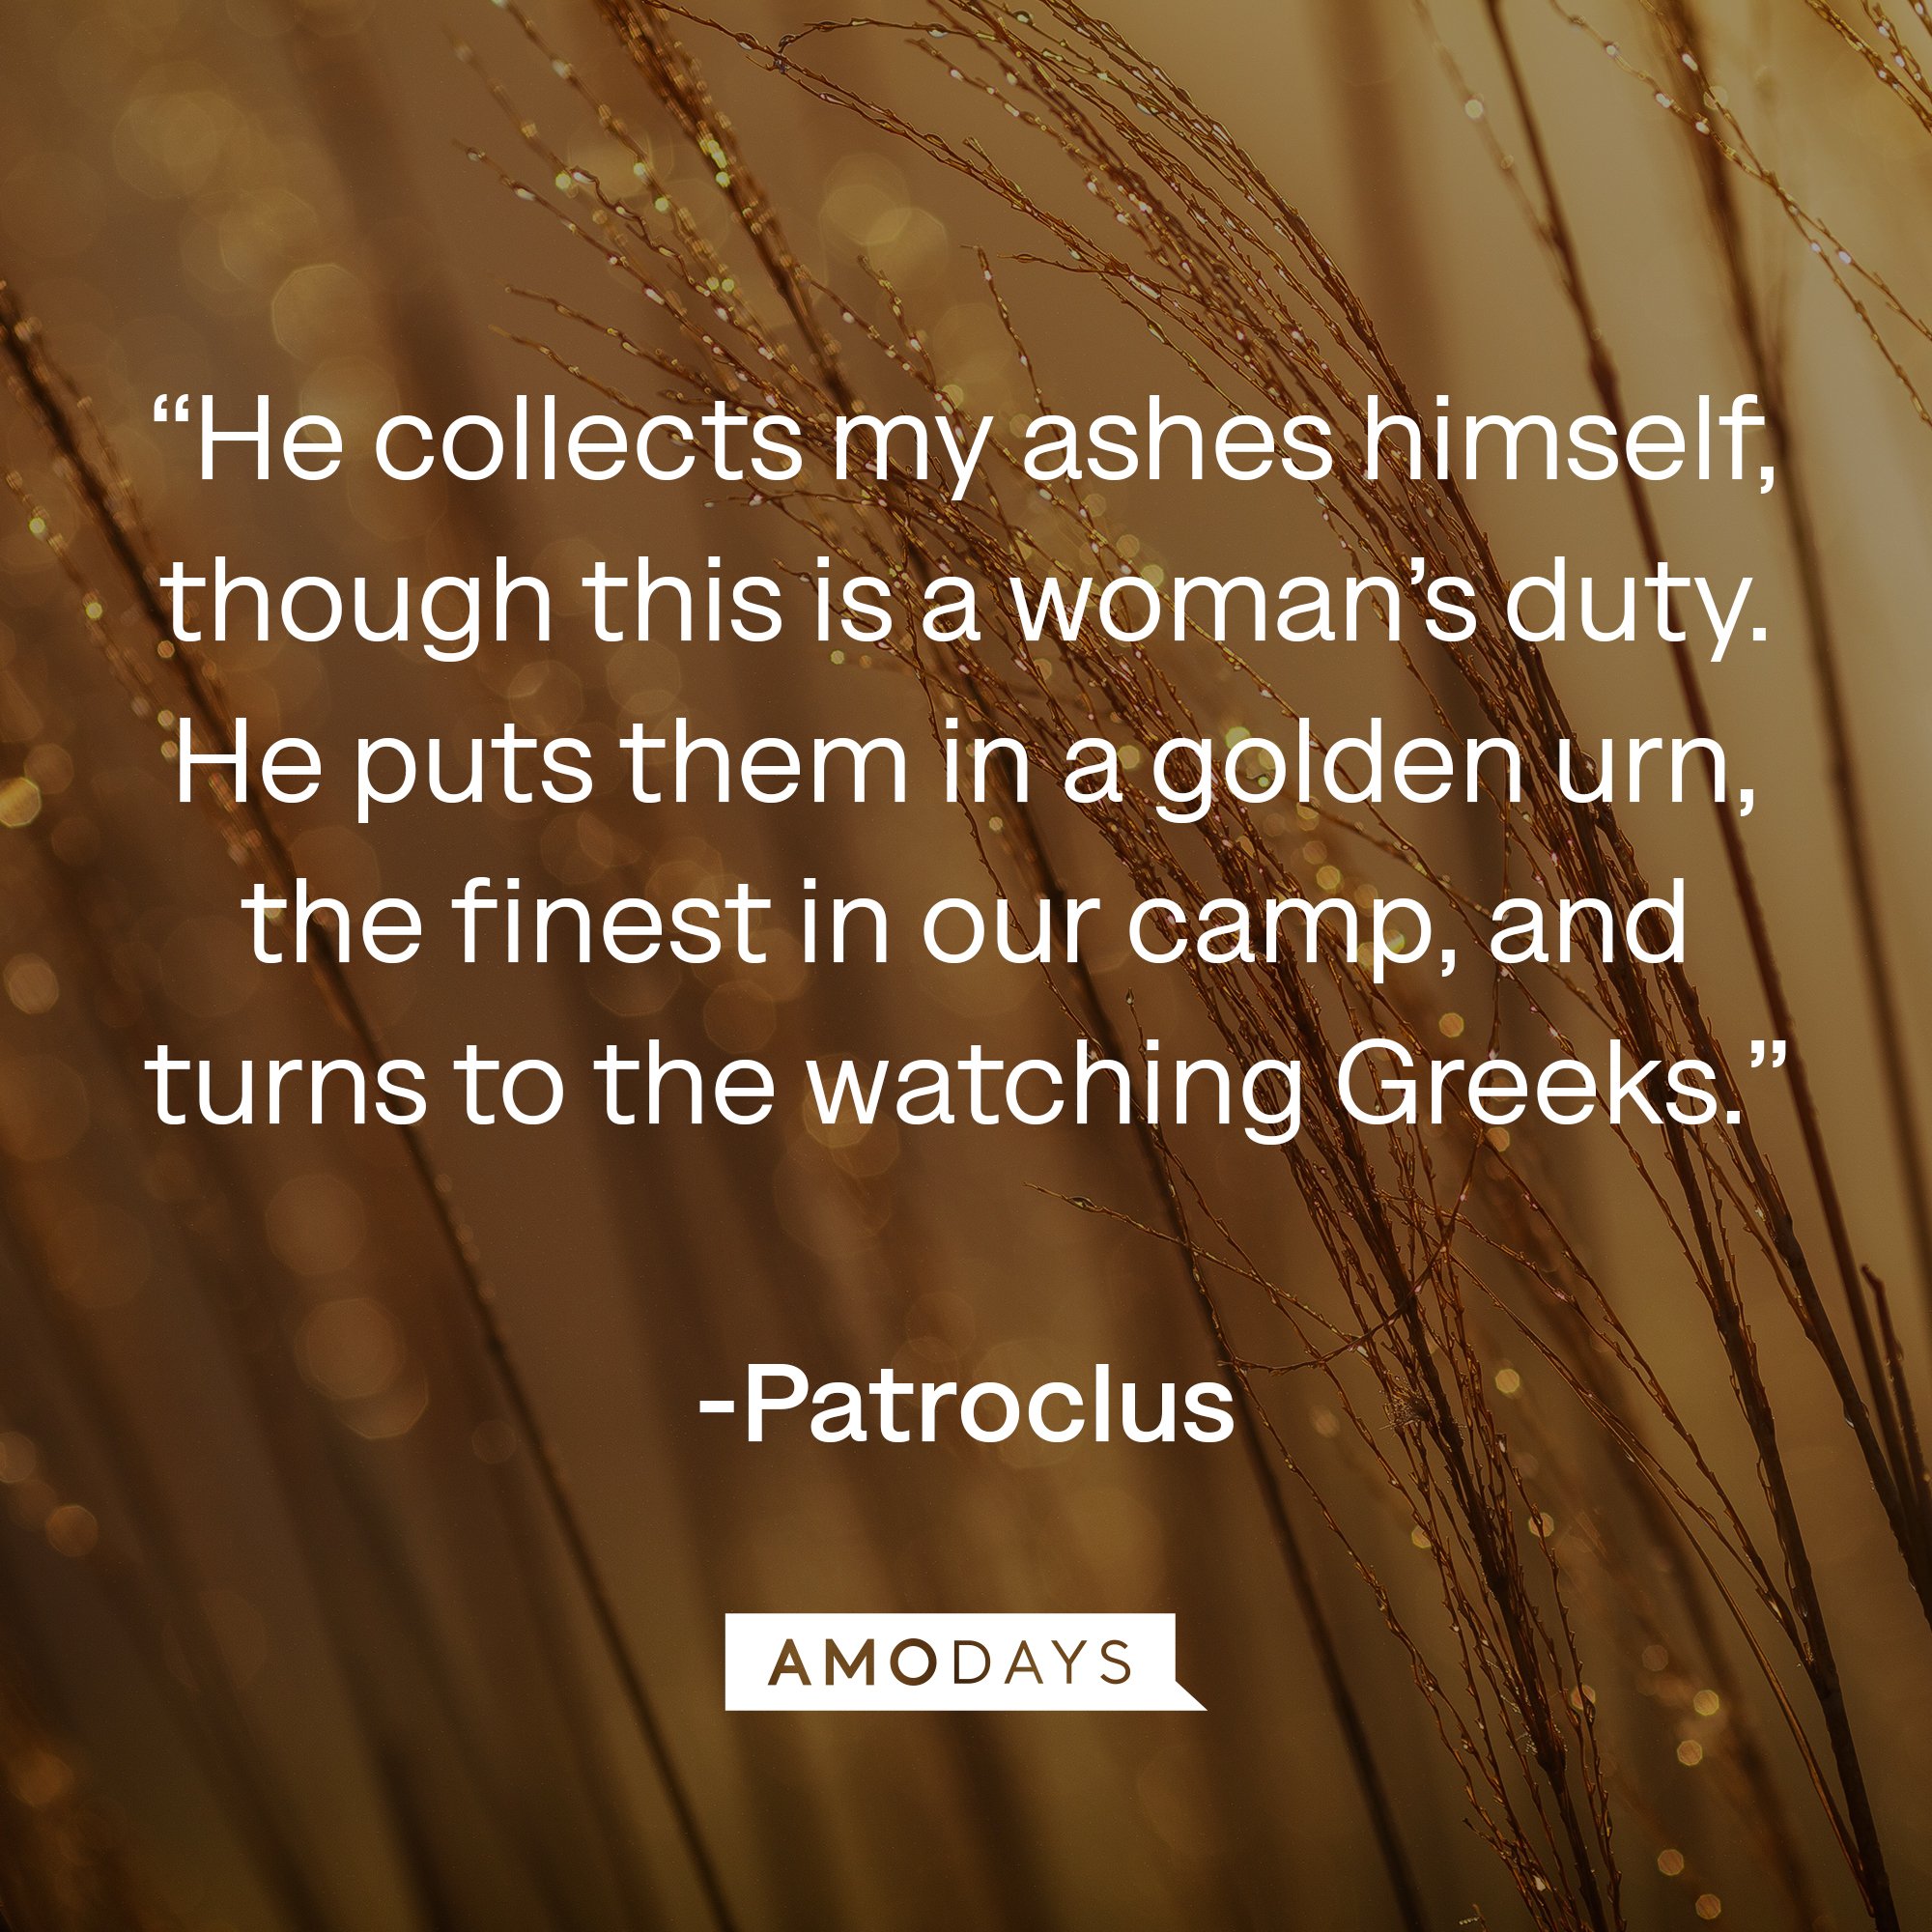  Patroclus's quote: “He collects my ashes himself, though this is a woman’s duty. He puts them in a golden urn, the finest in our camp, and turns to the watching Greeks.” | Image: AmoDays